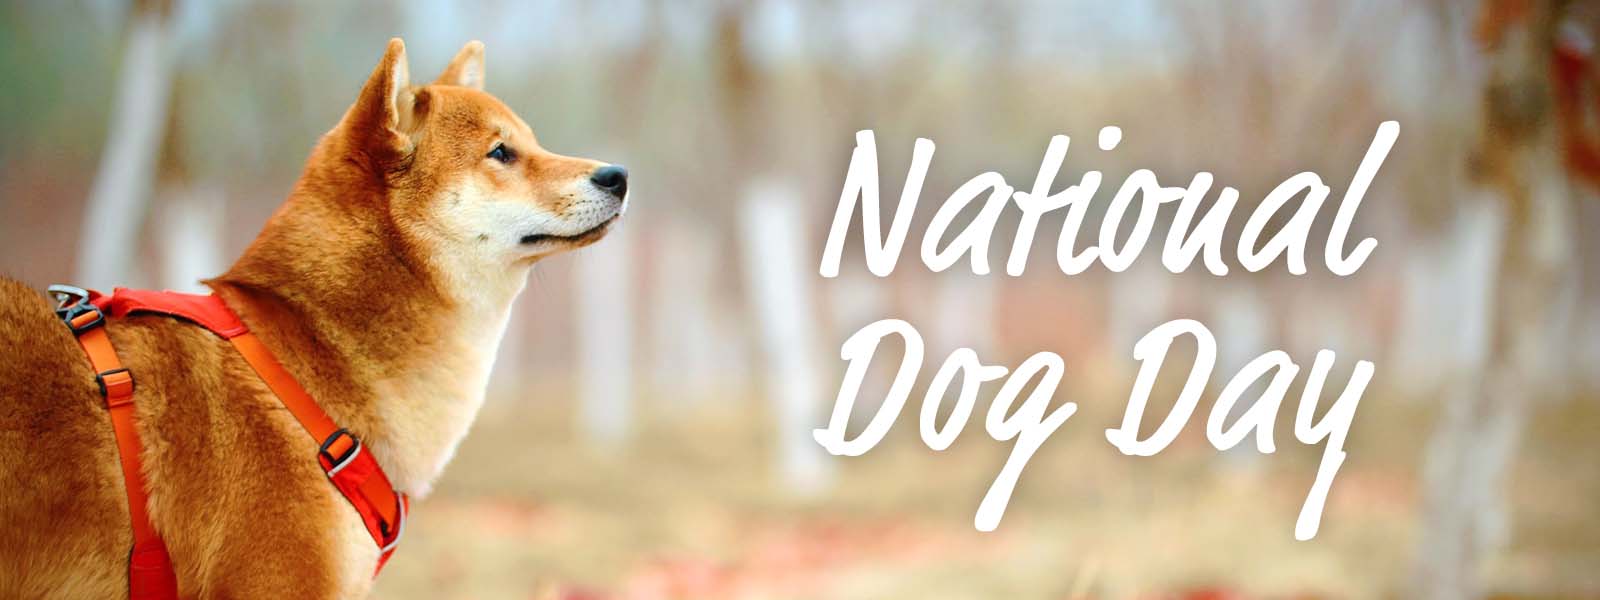 Happy National Dog Day! Here are Some Tips to Keep Your Dog Busy While You  Study From Home - Arizona Valor Preparatory Academy